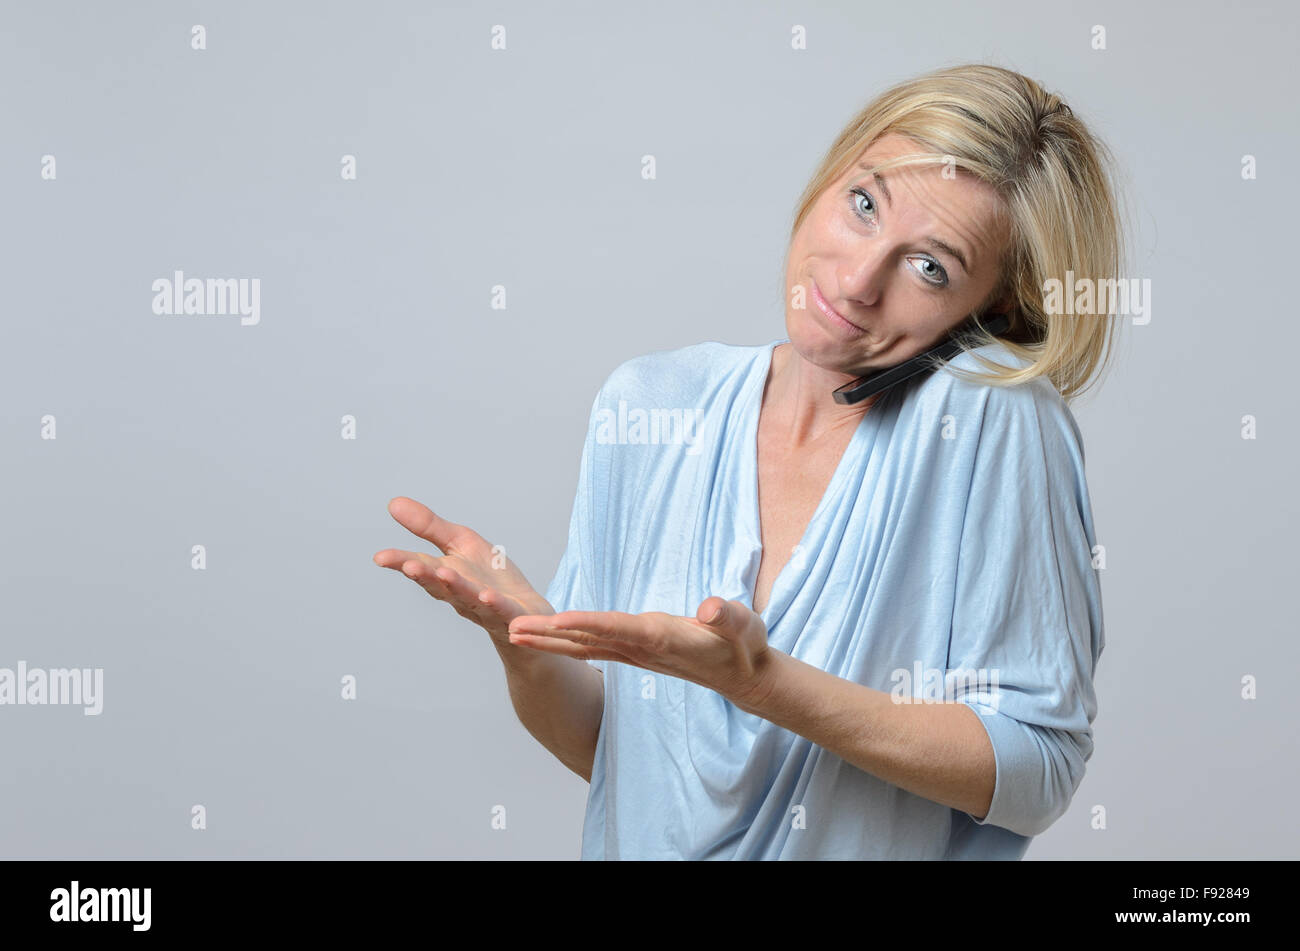 Attractive blond woman standing shrugging her shoulders in ignorance, indifference or confusion with a wry smile Stock Photo